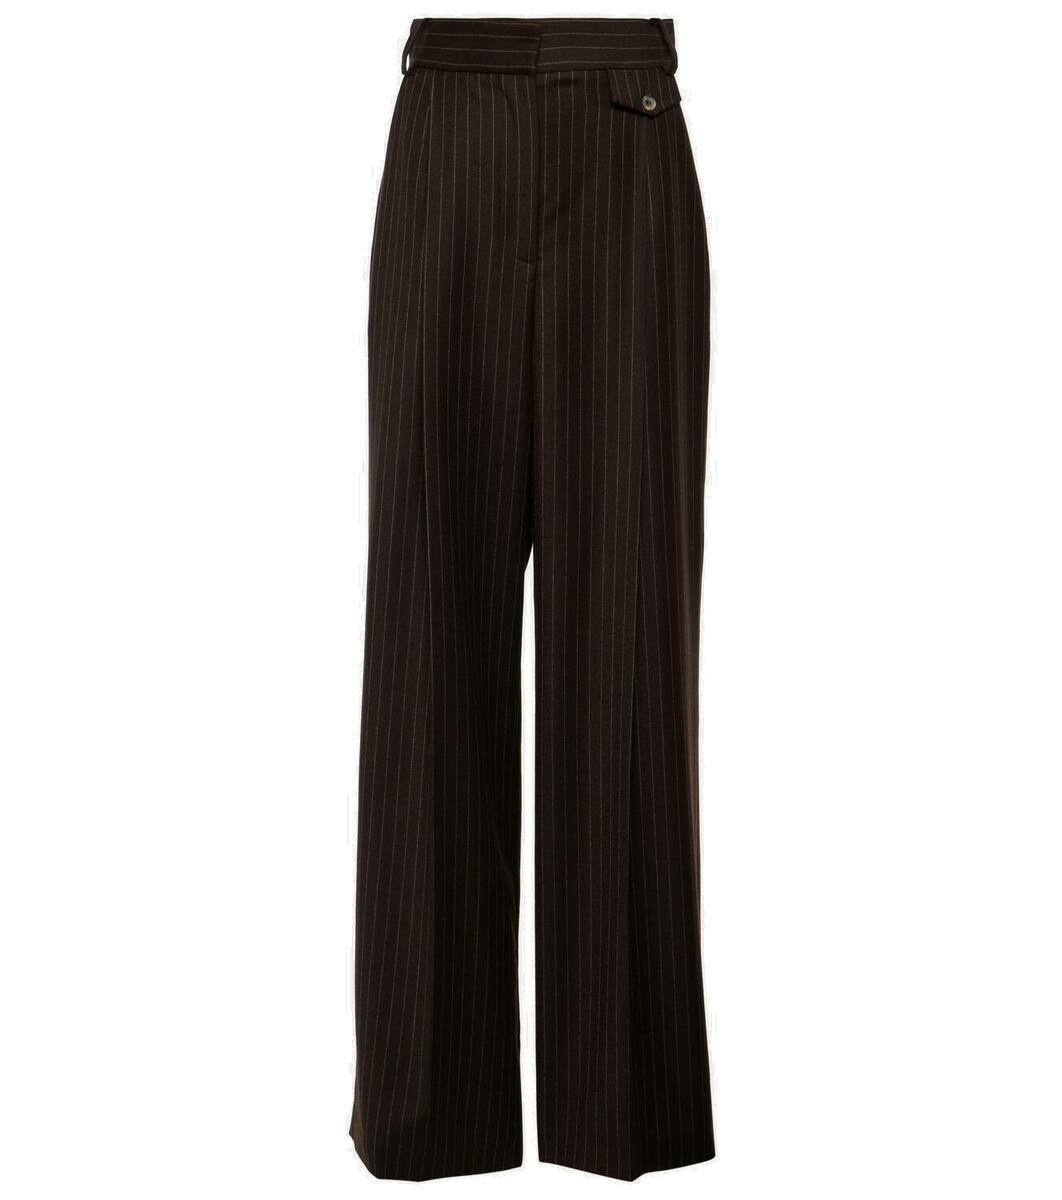 Photo: The Mannei Jafr high-rise wool wide-leg pants